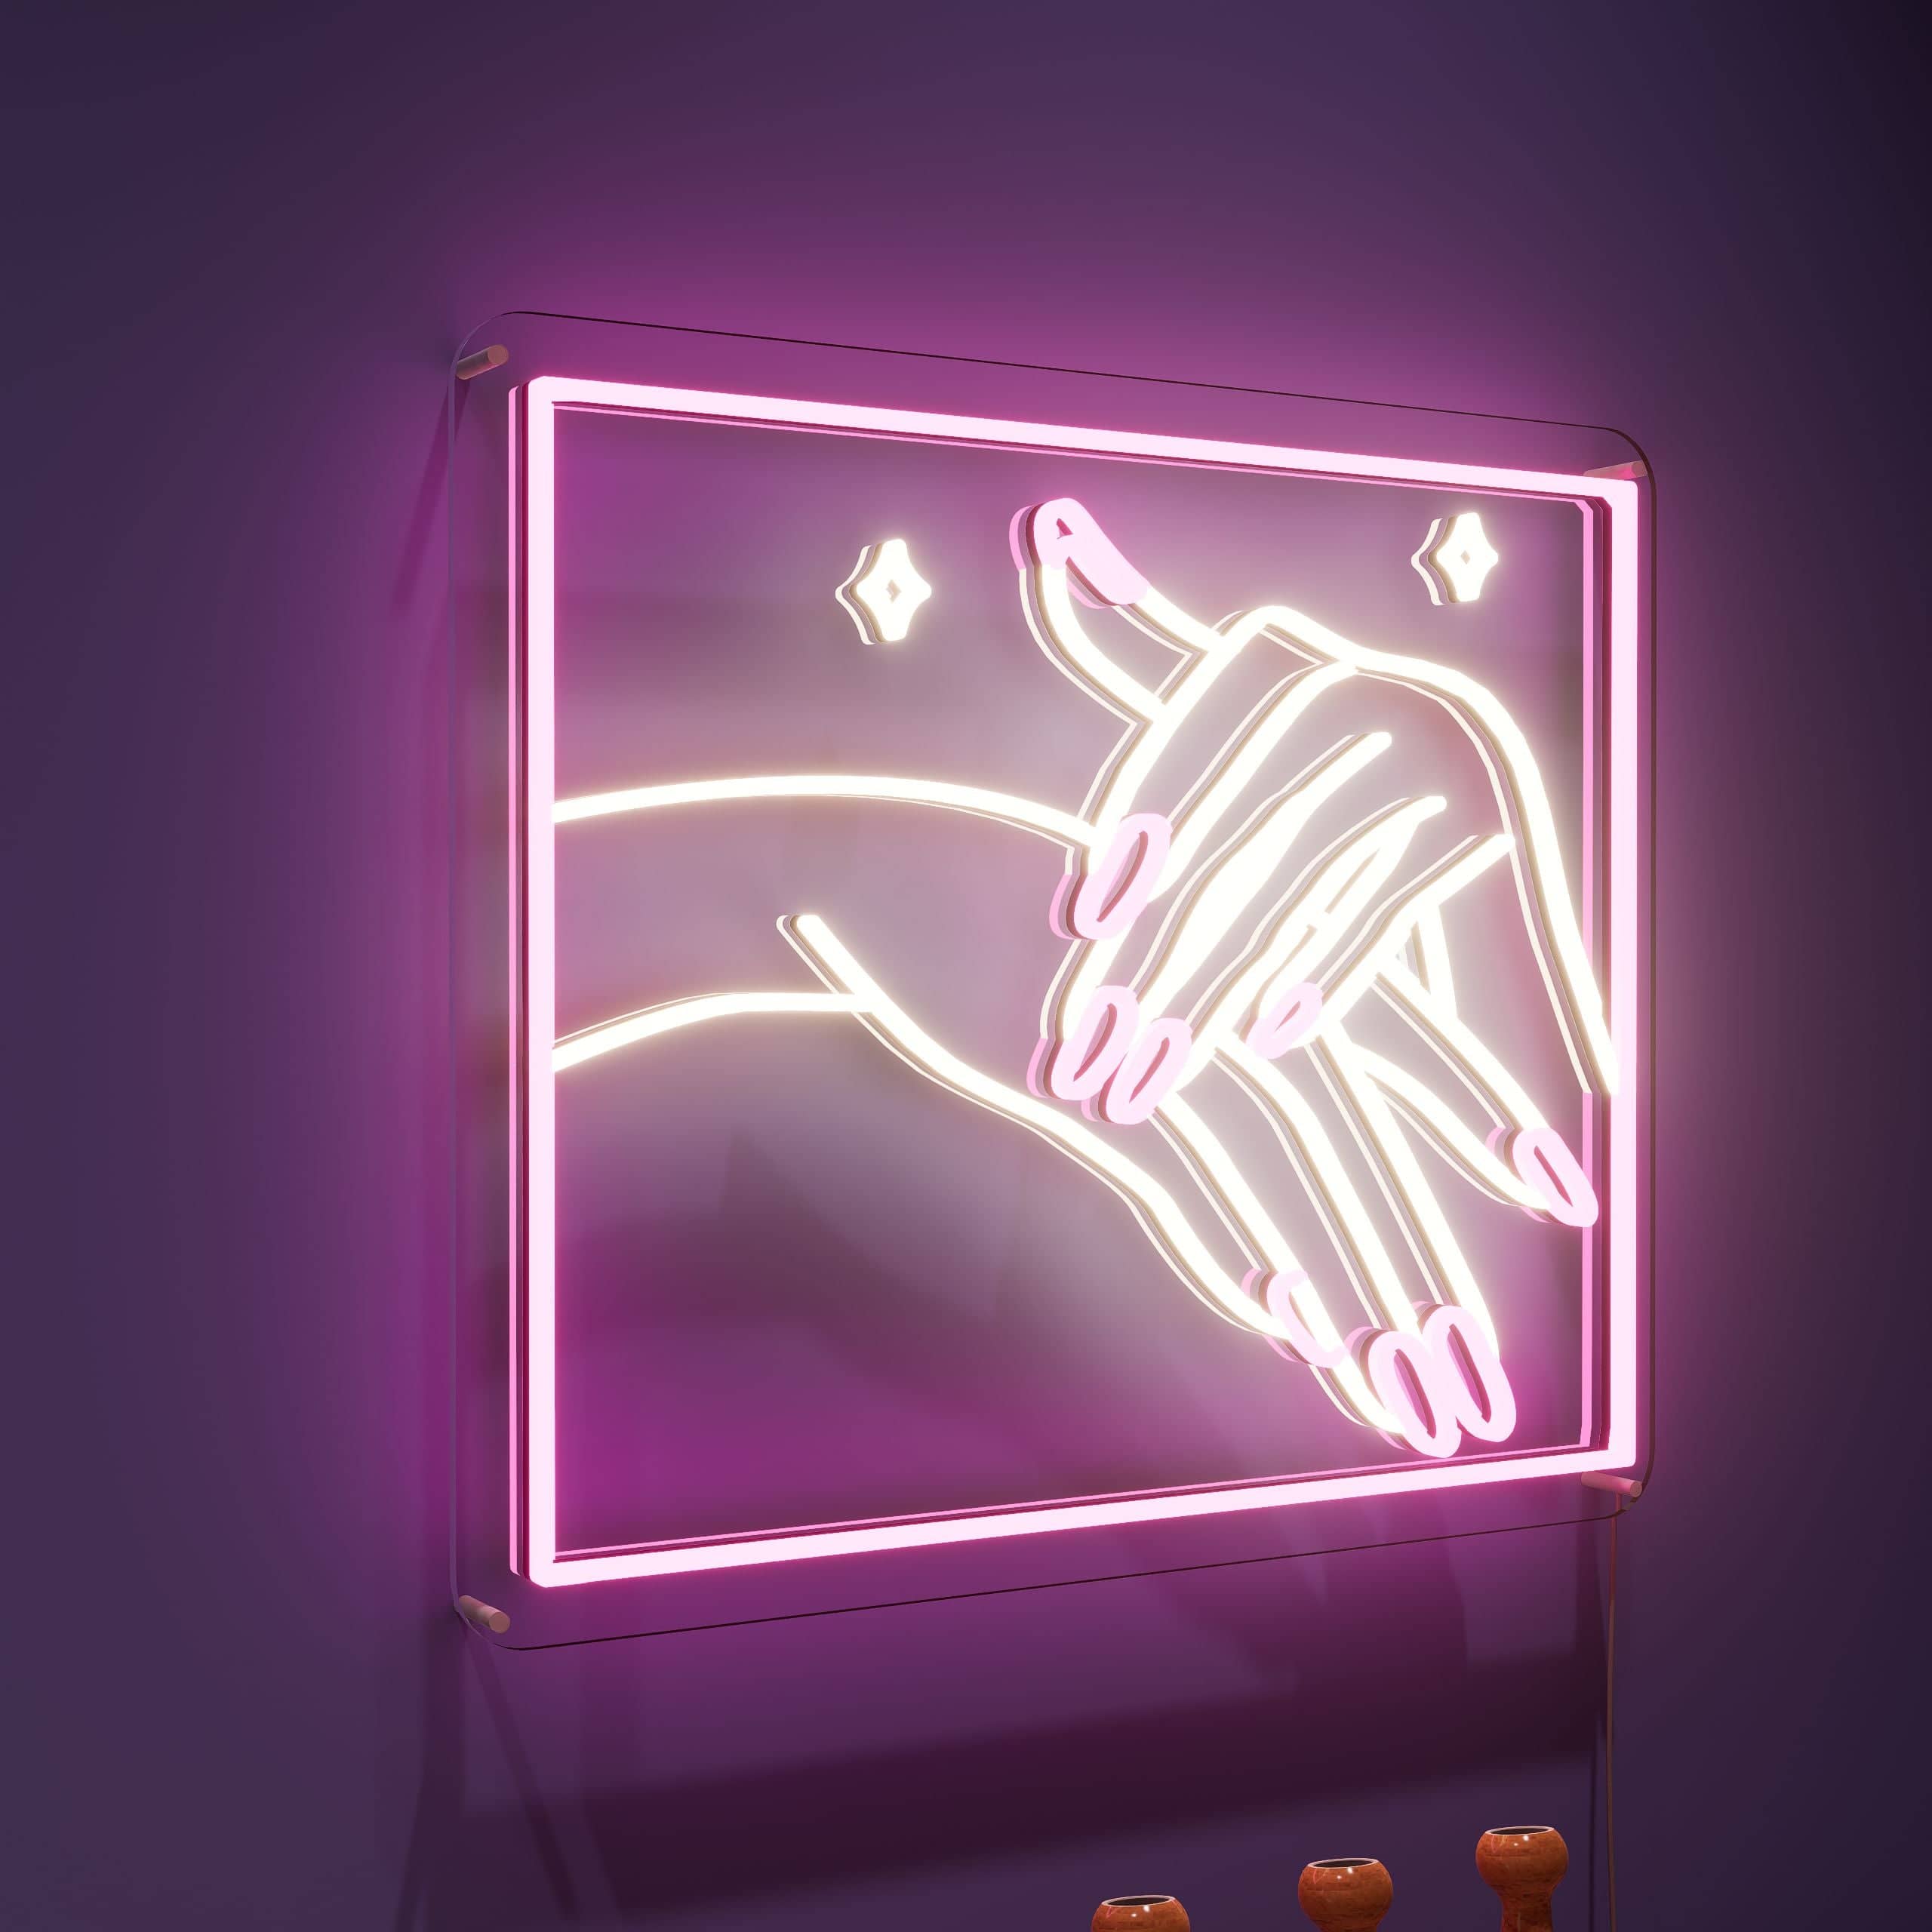 twinkling-star-nail-design-neon-sign-lite